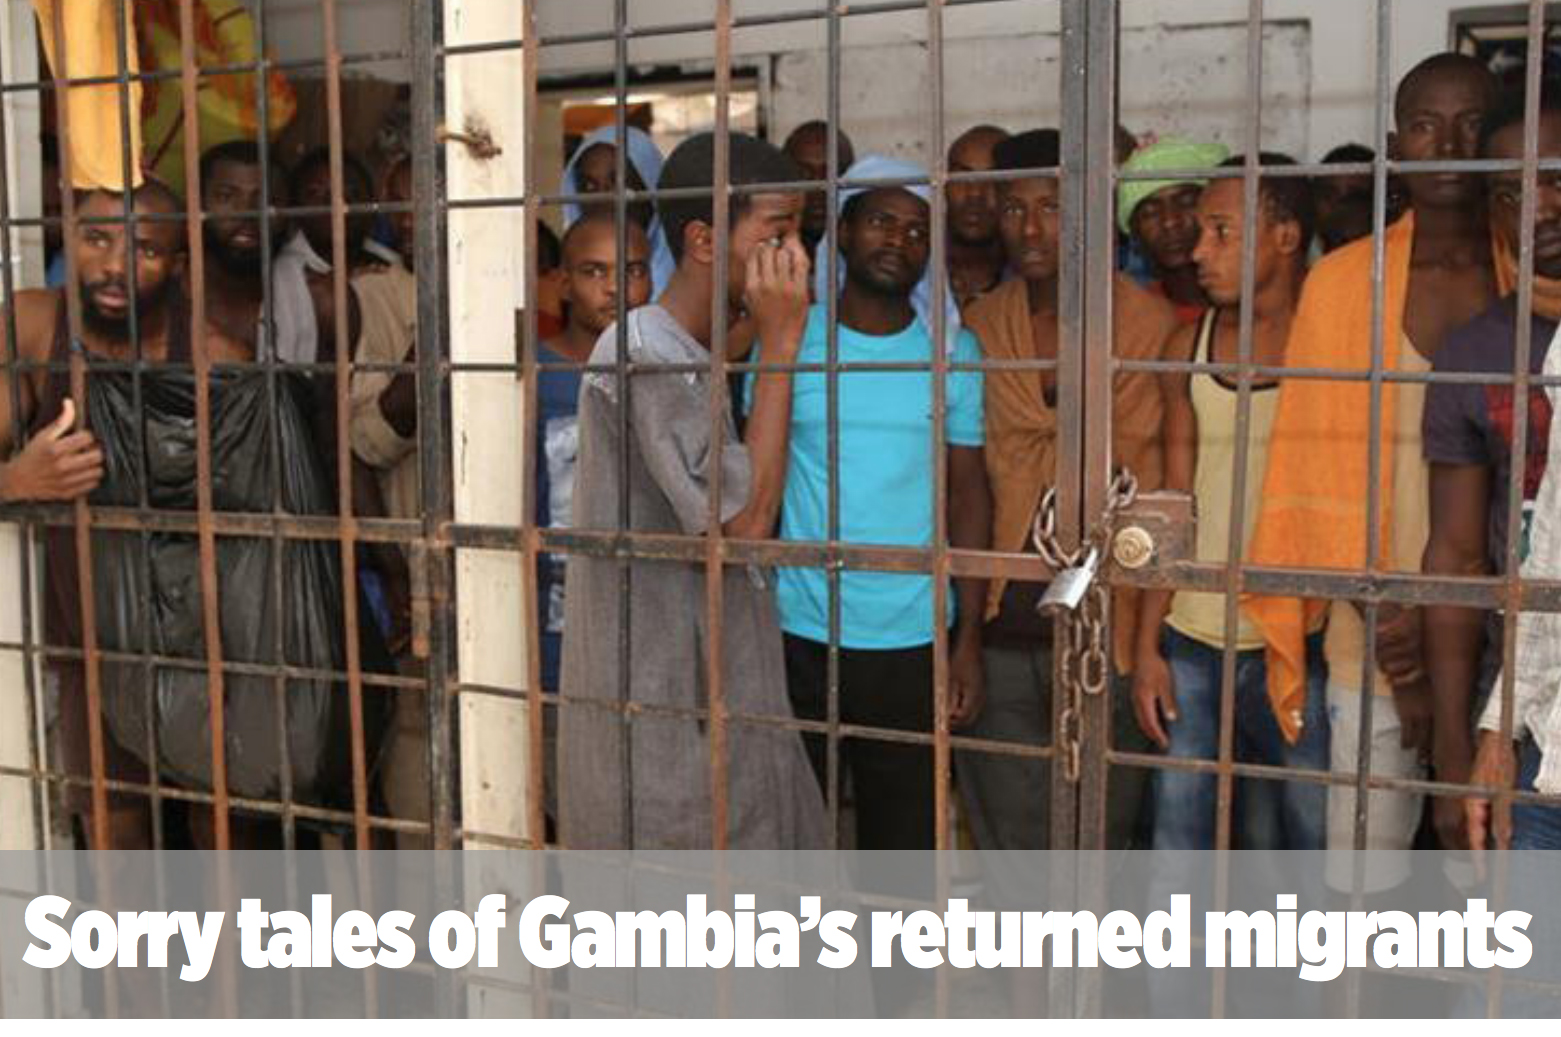 Sorry tales of Gambia's returned migrants